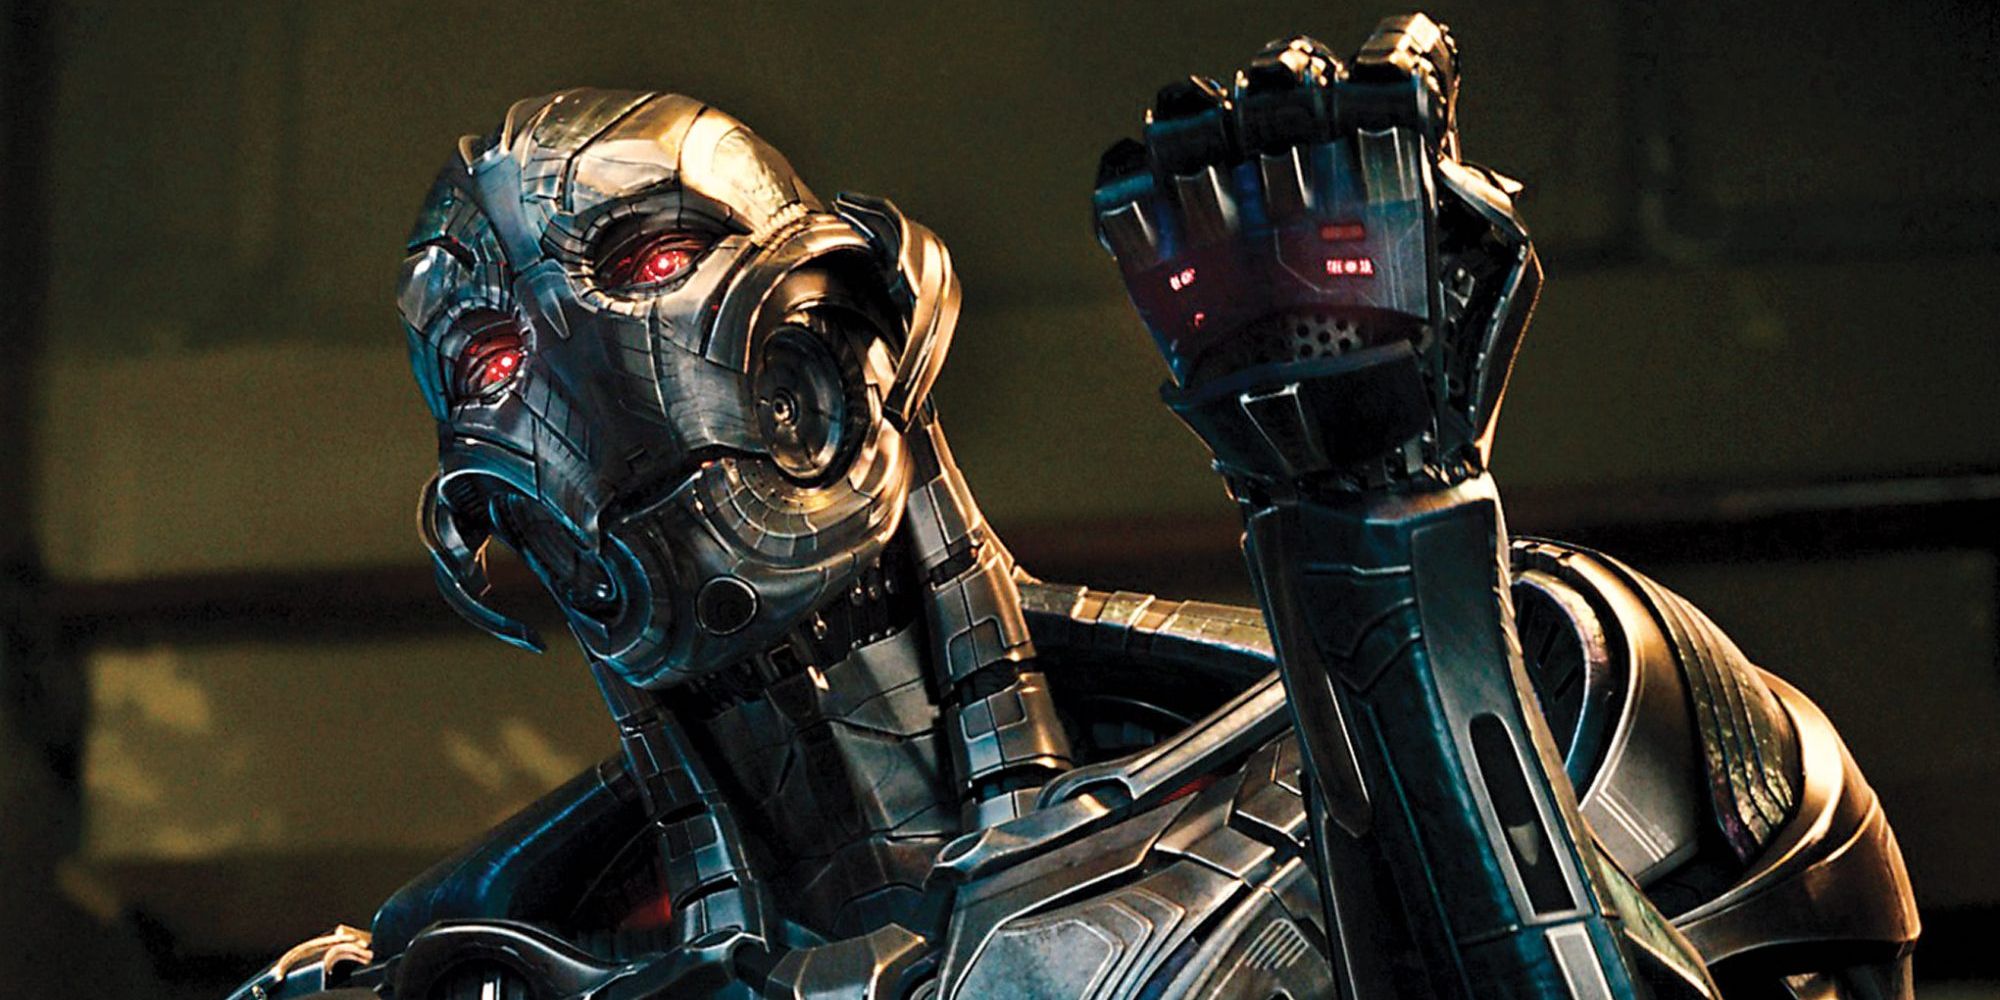 Ultron raising his fist in Avengers Age Of Ultron